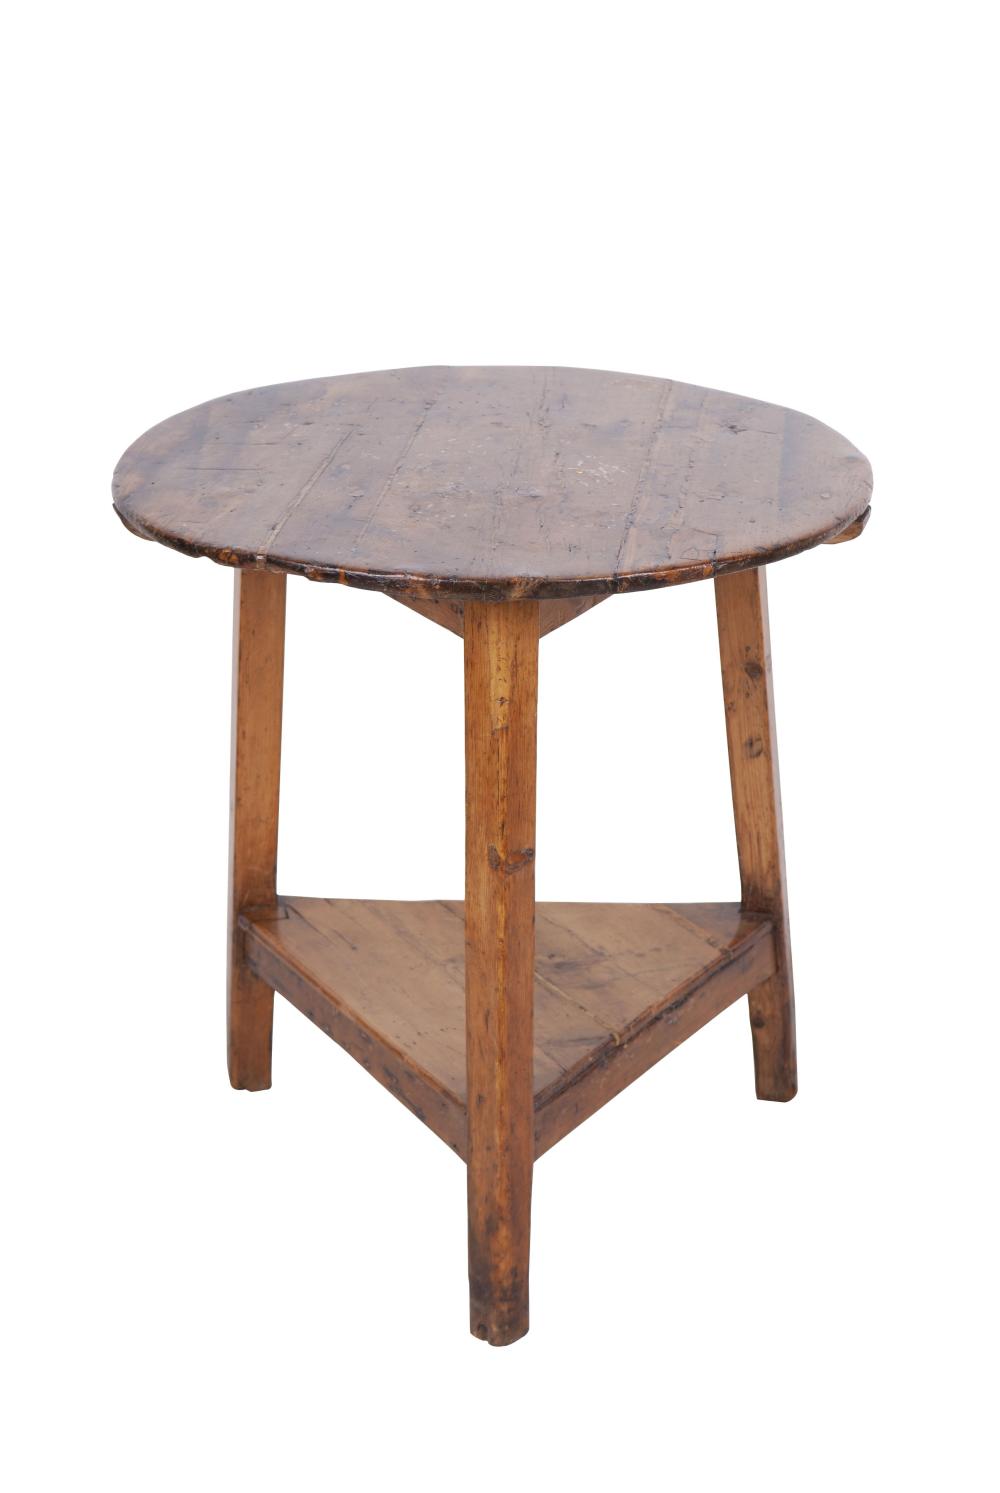 ENGLISH PINE CRICKET TABLE27 inches